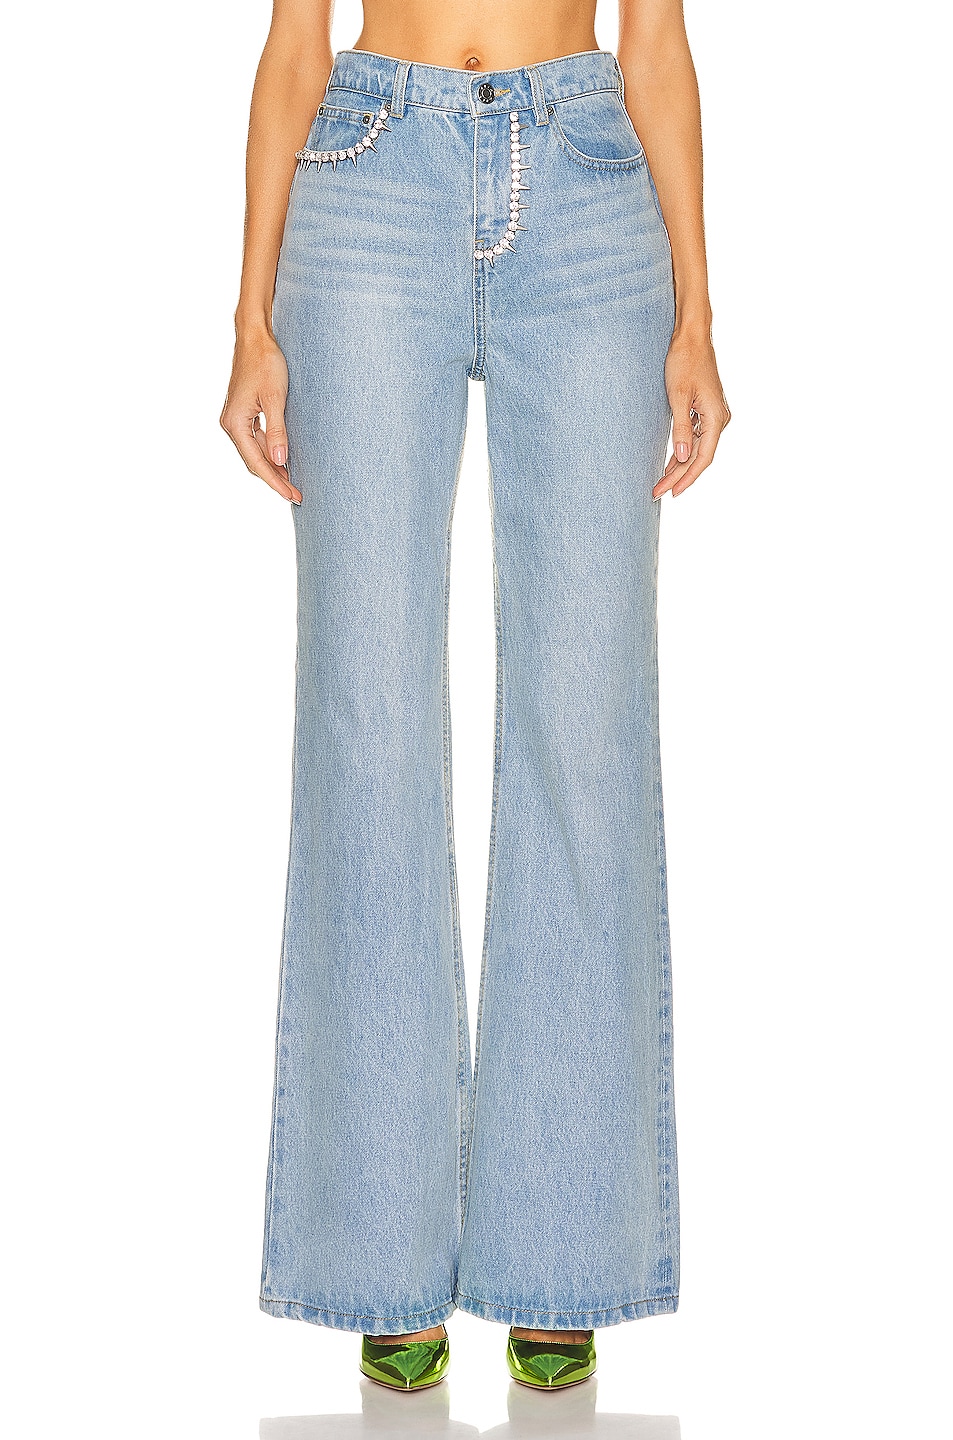 Image 1 of AREA 'Area' Nameplate Bootcut Jean in Light Blue